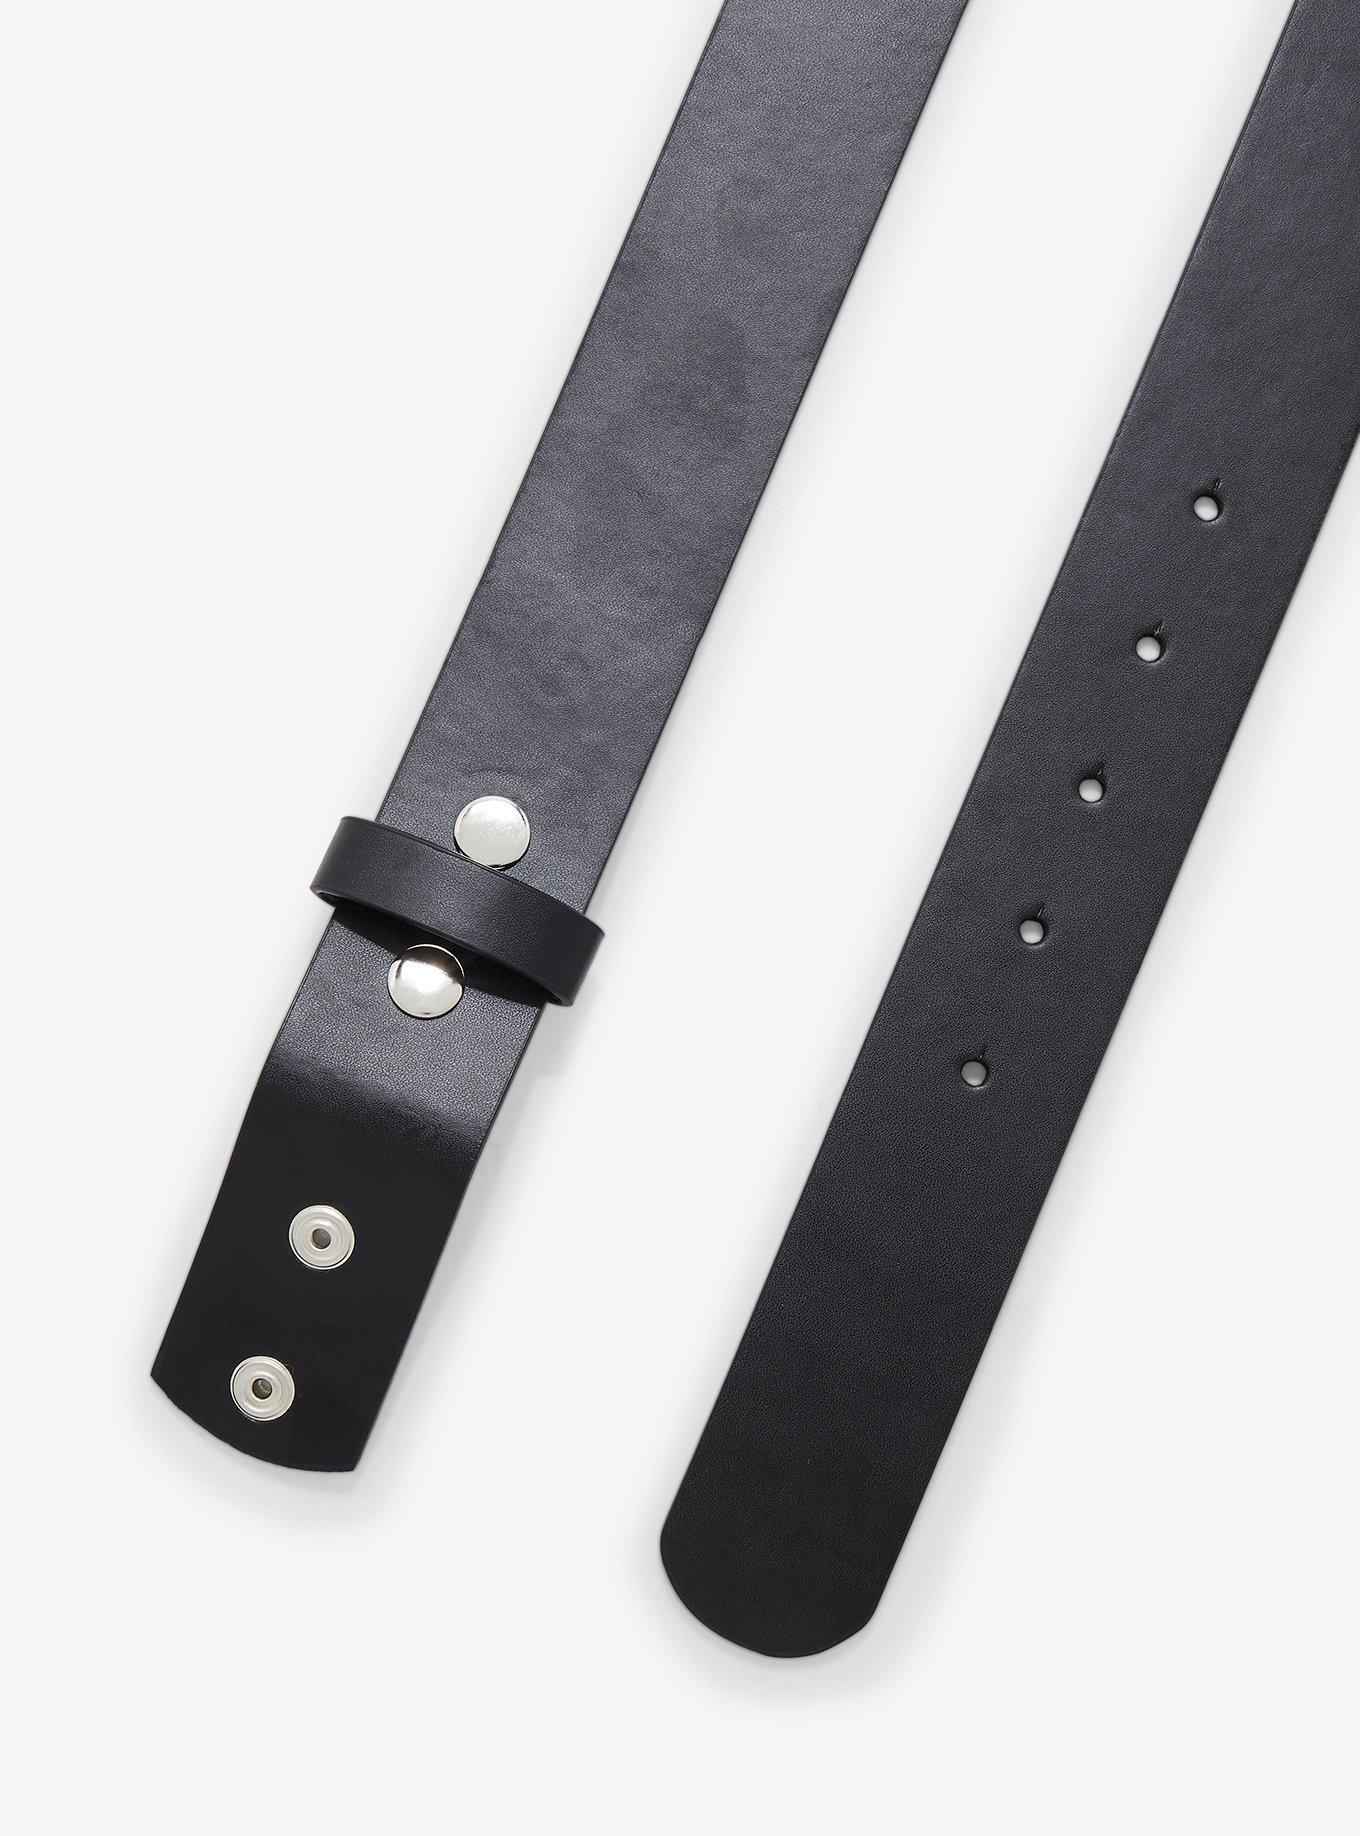 Black Faux Leather Belt Without Buckle